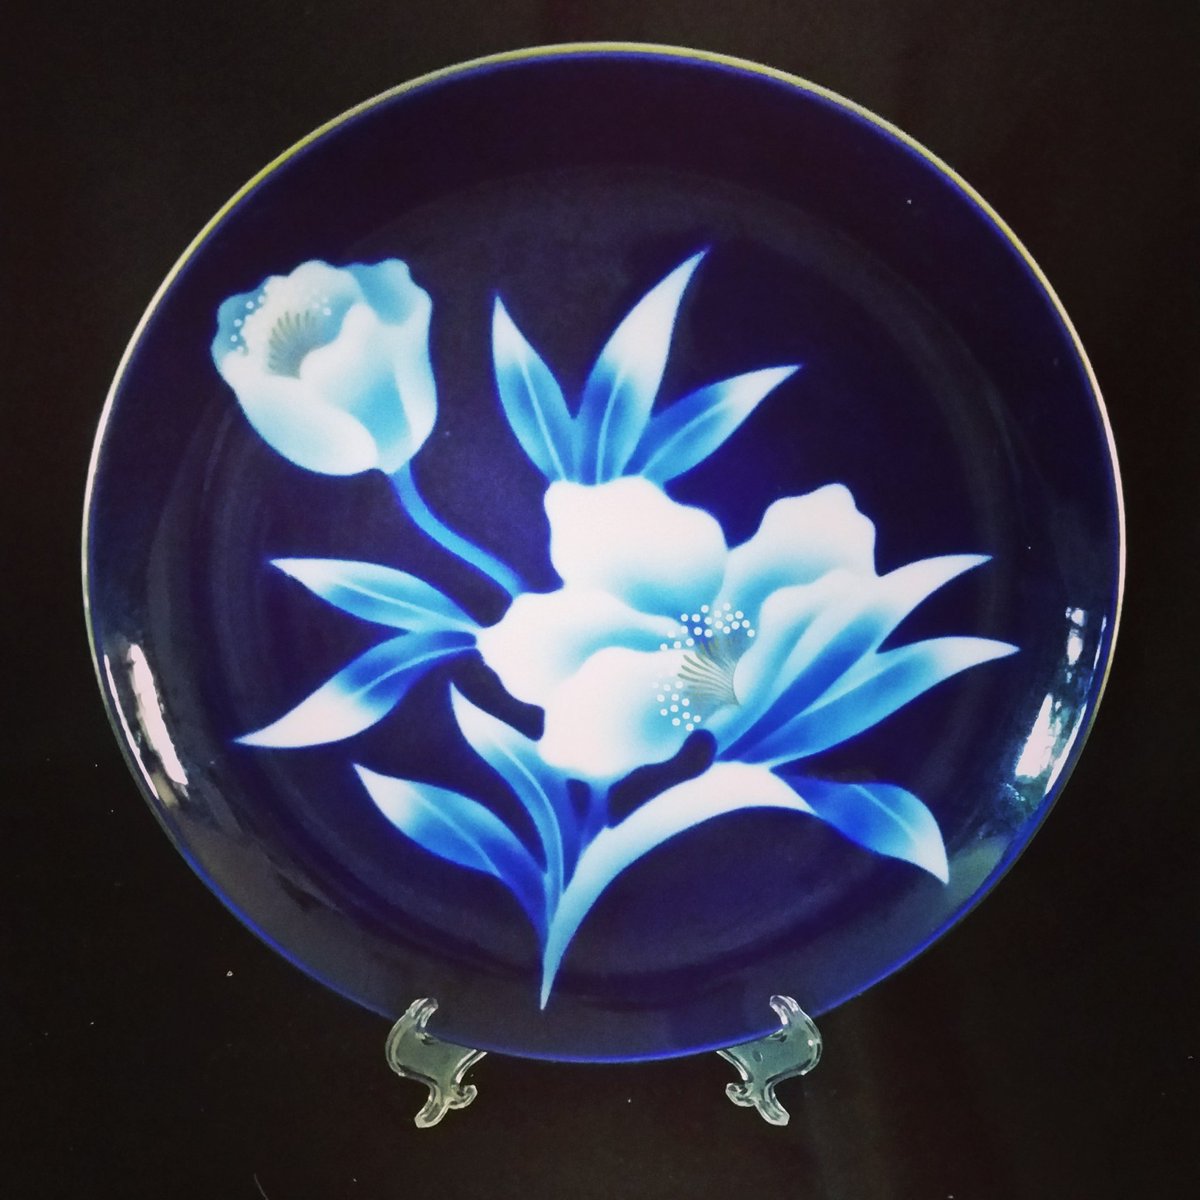 New vintage wall decor in my shop. Check it out at yellowroserestore.etsy.com. this one is so beautiful! Unique lily design. Made in japan. #Japan #lily #walldecor #wallhanging #vintage #vintageplate #plate #blue